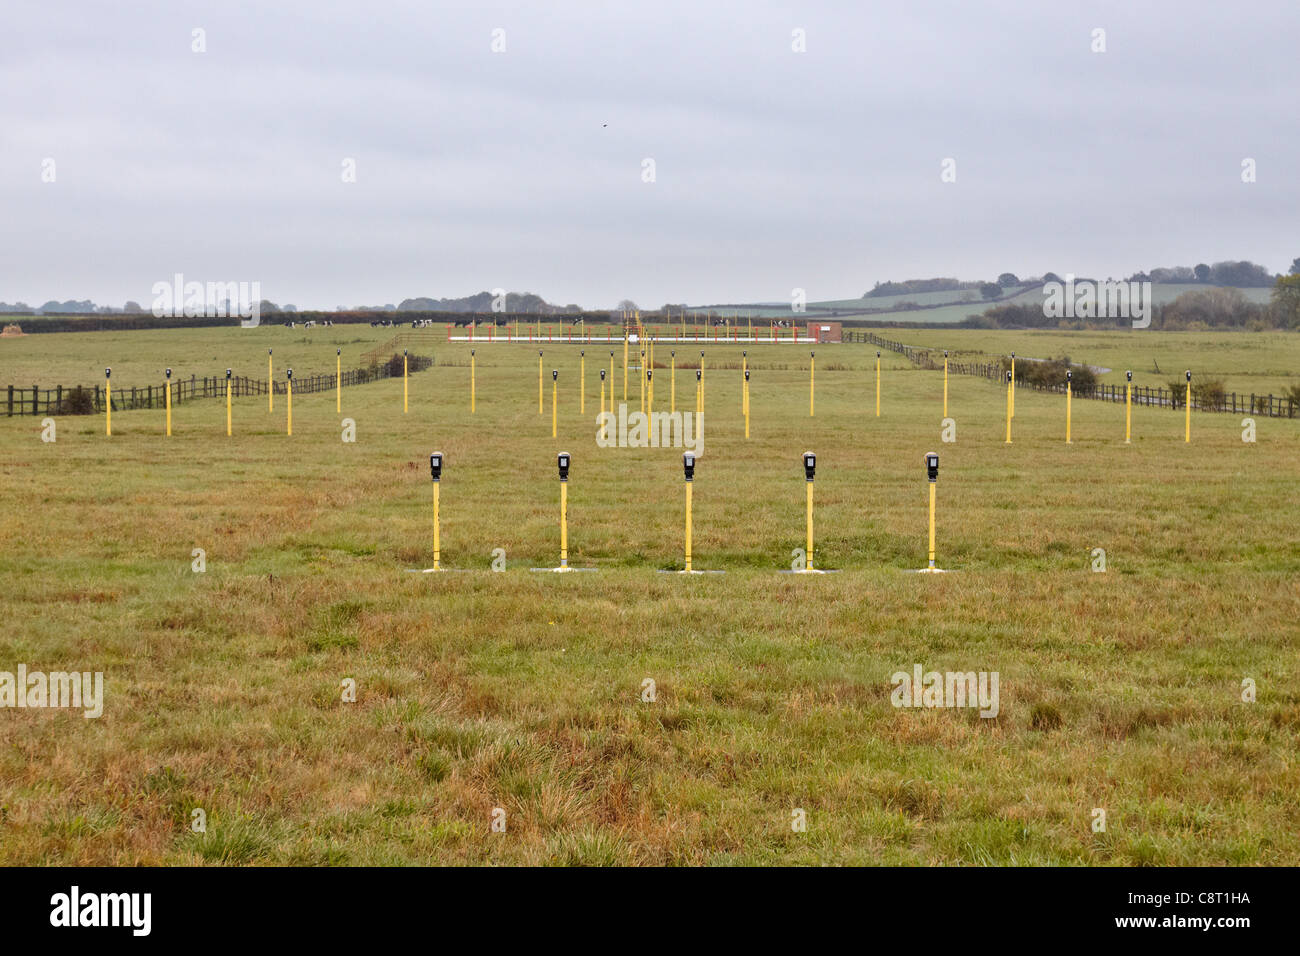 General view of RAF Brize Norton runway and airfield Stock Photo